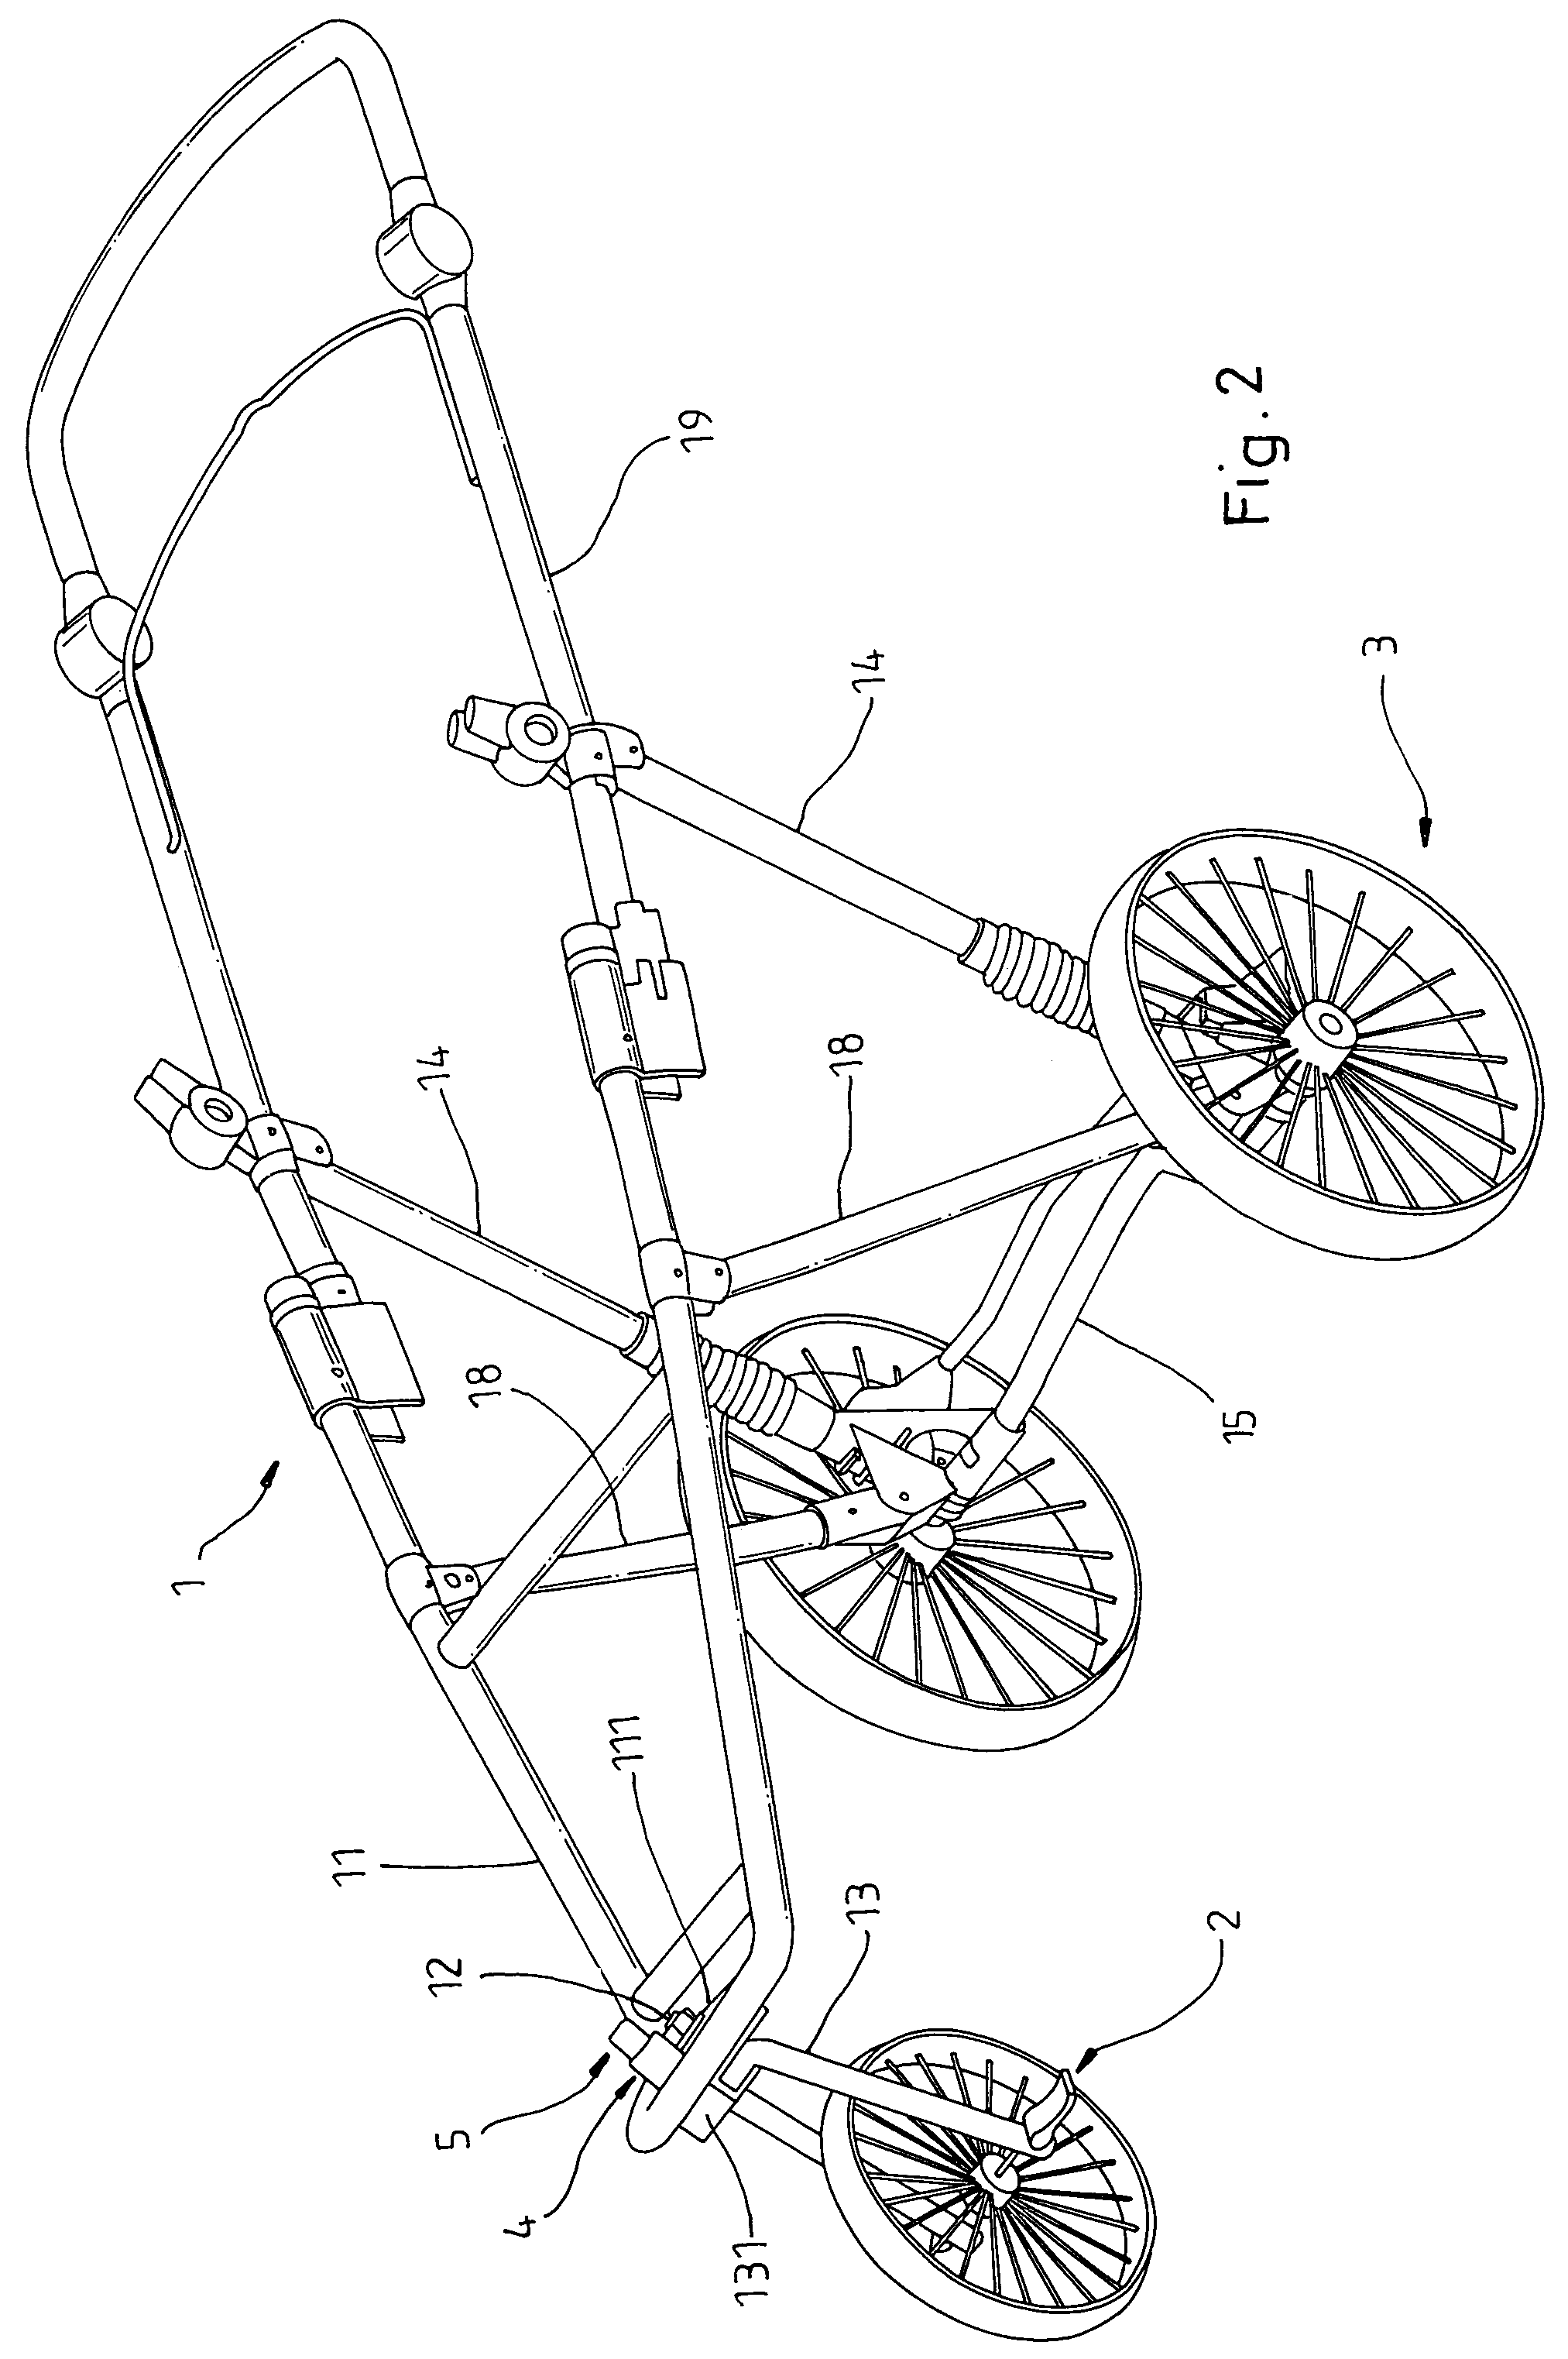 Front fork swivel control structure of a jogging stroller